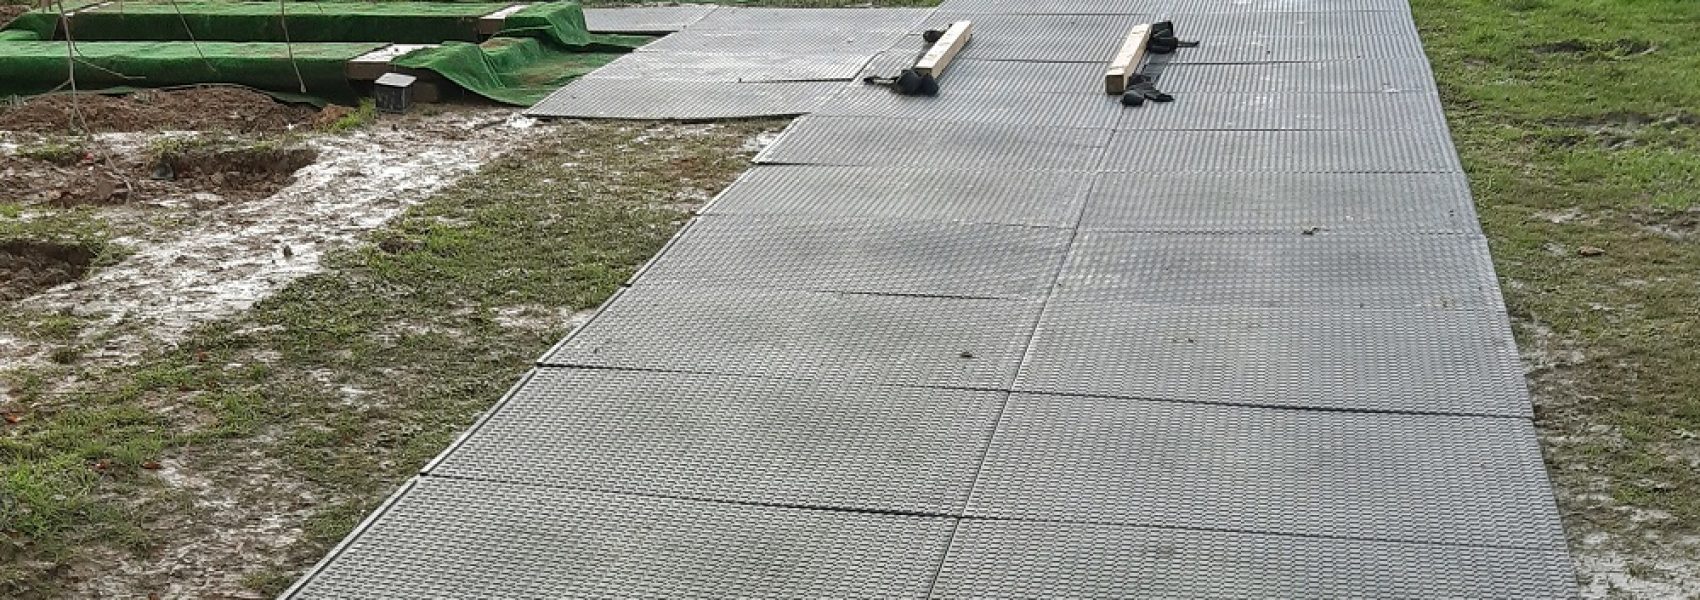 temporary ground protection pathway at cemetery